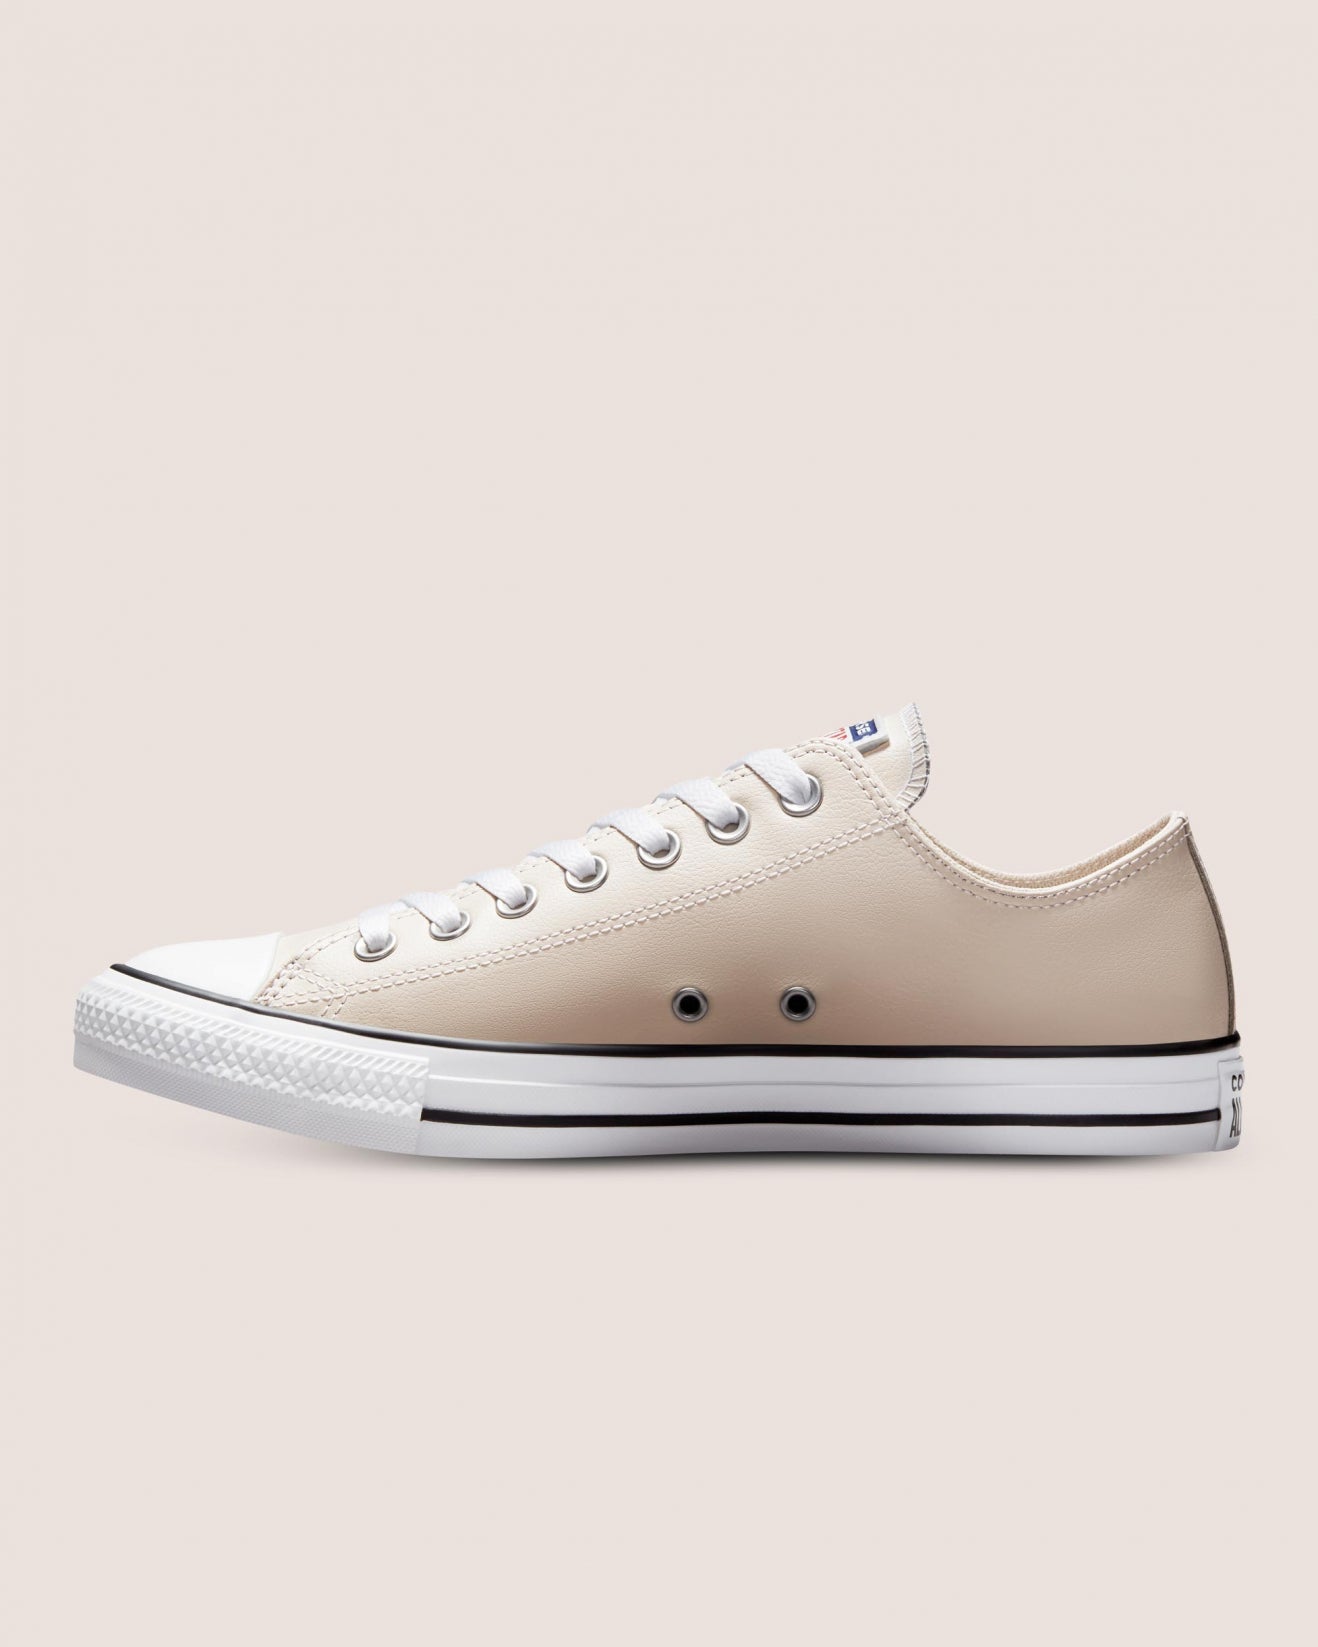 + Unisex Converse Chuck Taylor All Star Faux Leather Low Top Desert Sand (172699) - SAN - R1L8